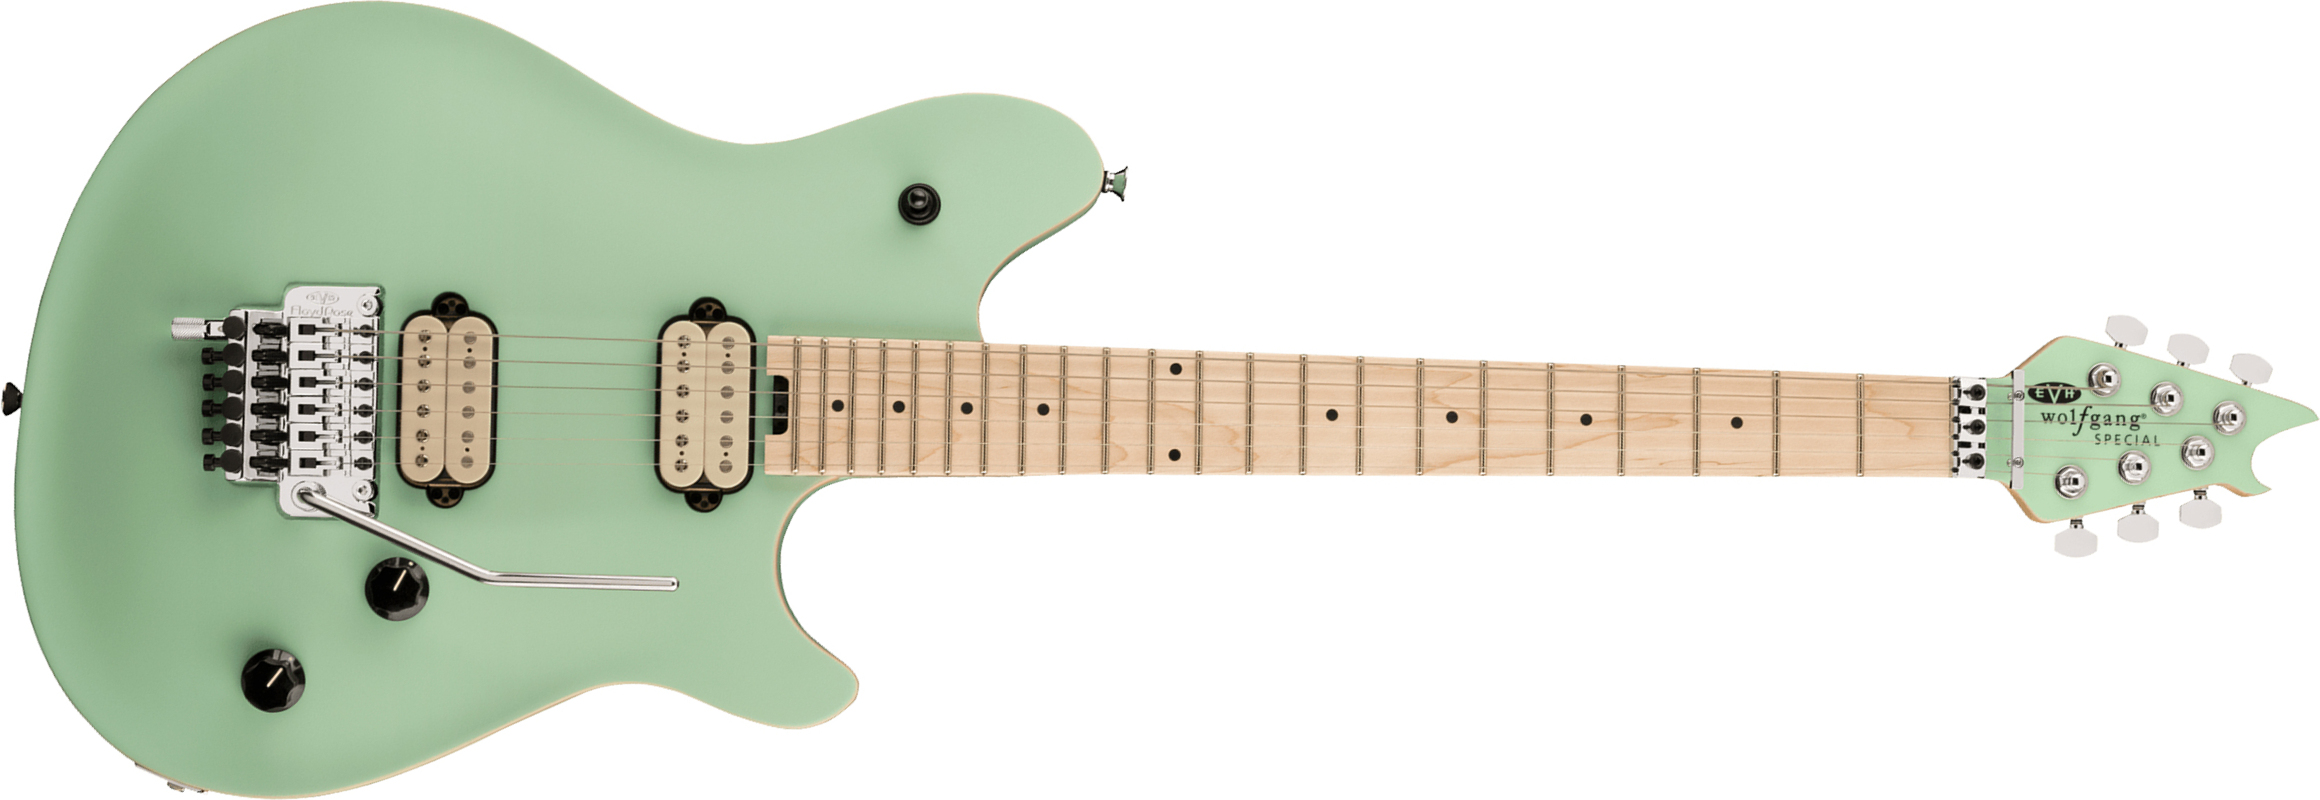 Evh Wolfgang Special 2h Fr Mn - Satin Surf Green - Guitarra electrica metalica - Main picture